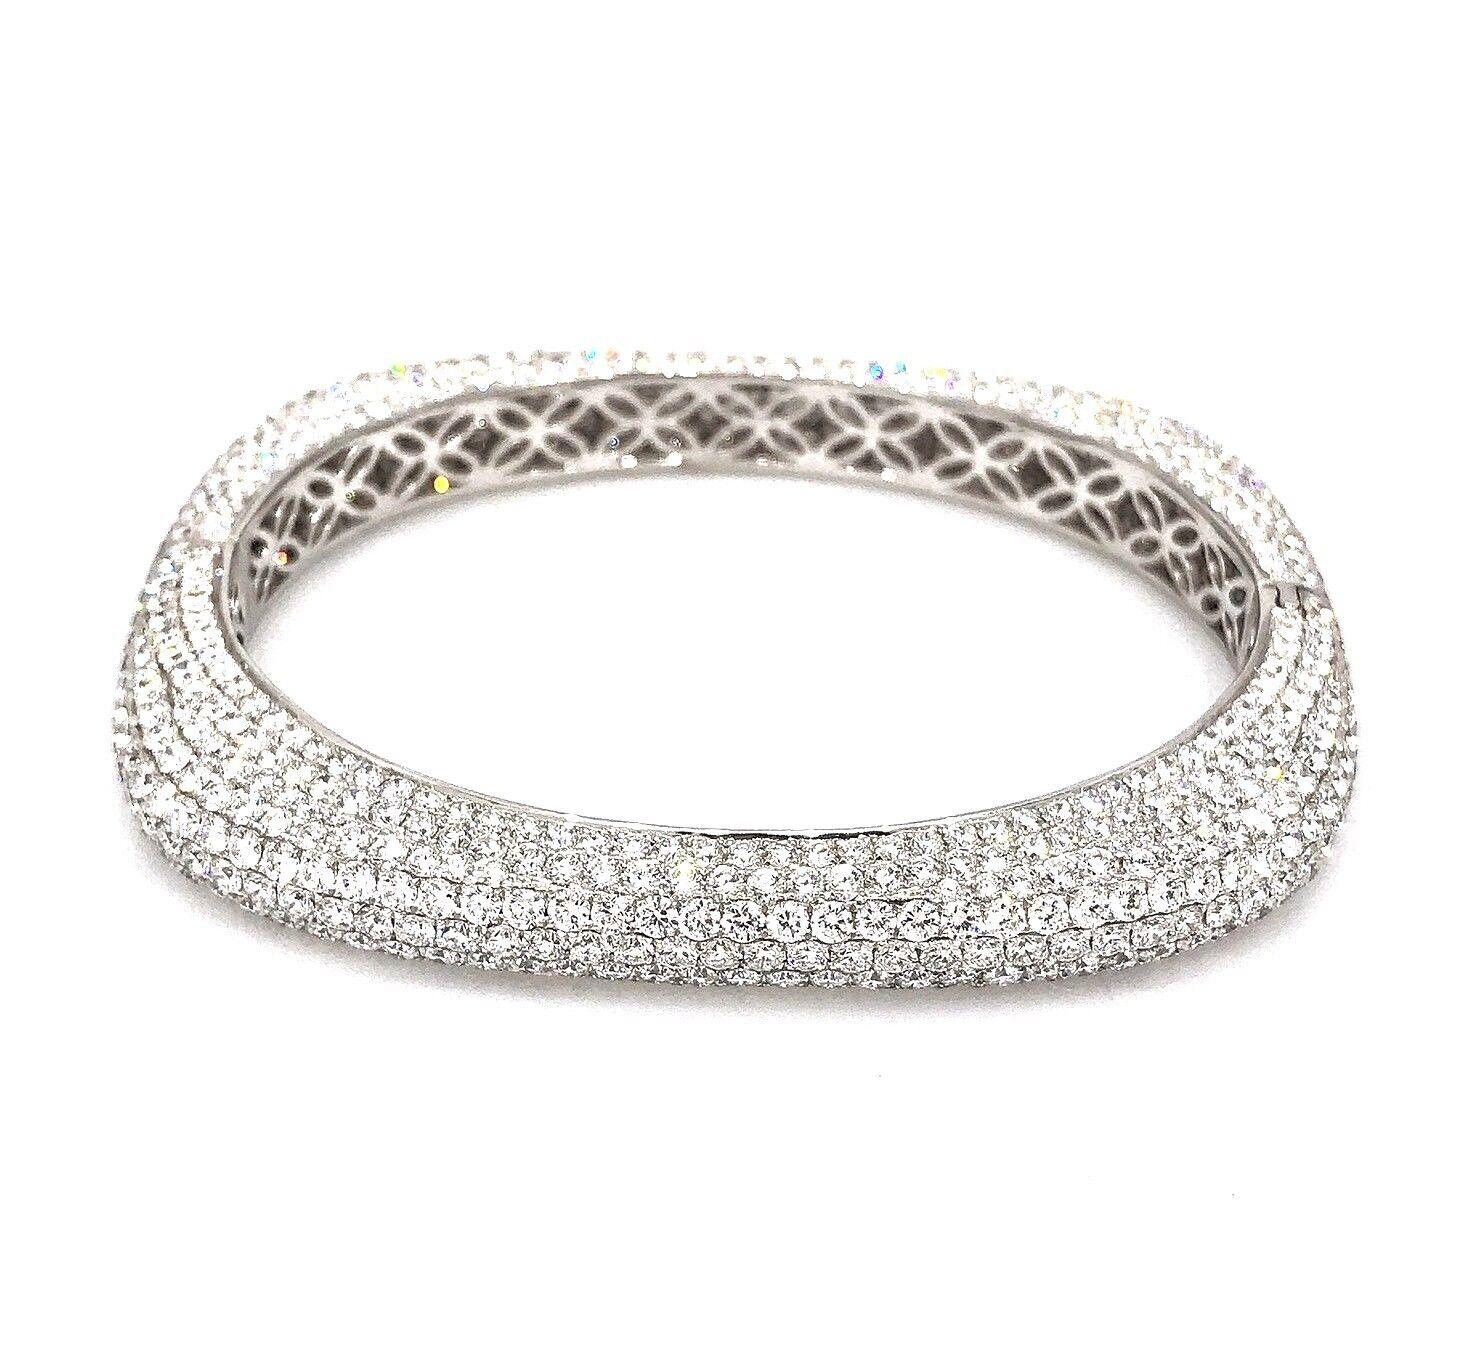 Rounded Square Diamond Pave Bangle Bracelet 18k White Gold

Diamond Pave Bangle Bracelet Rounded Square Shape features 22.59 carats of Round Brilliant Full cut Diamonds Pave set over entire bangle with oval opening. The bangle fits a size 7